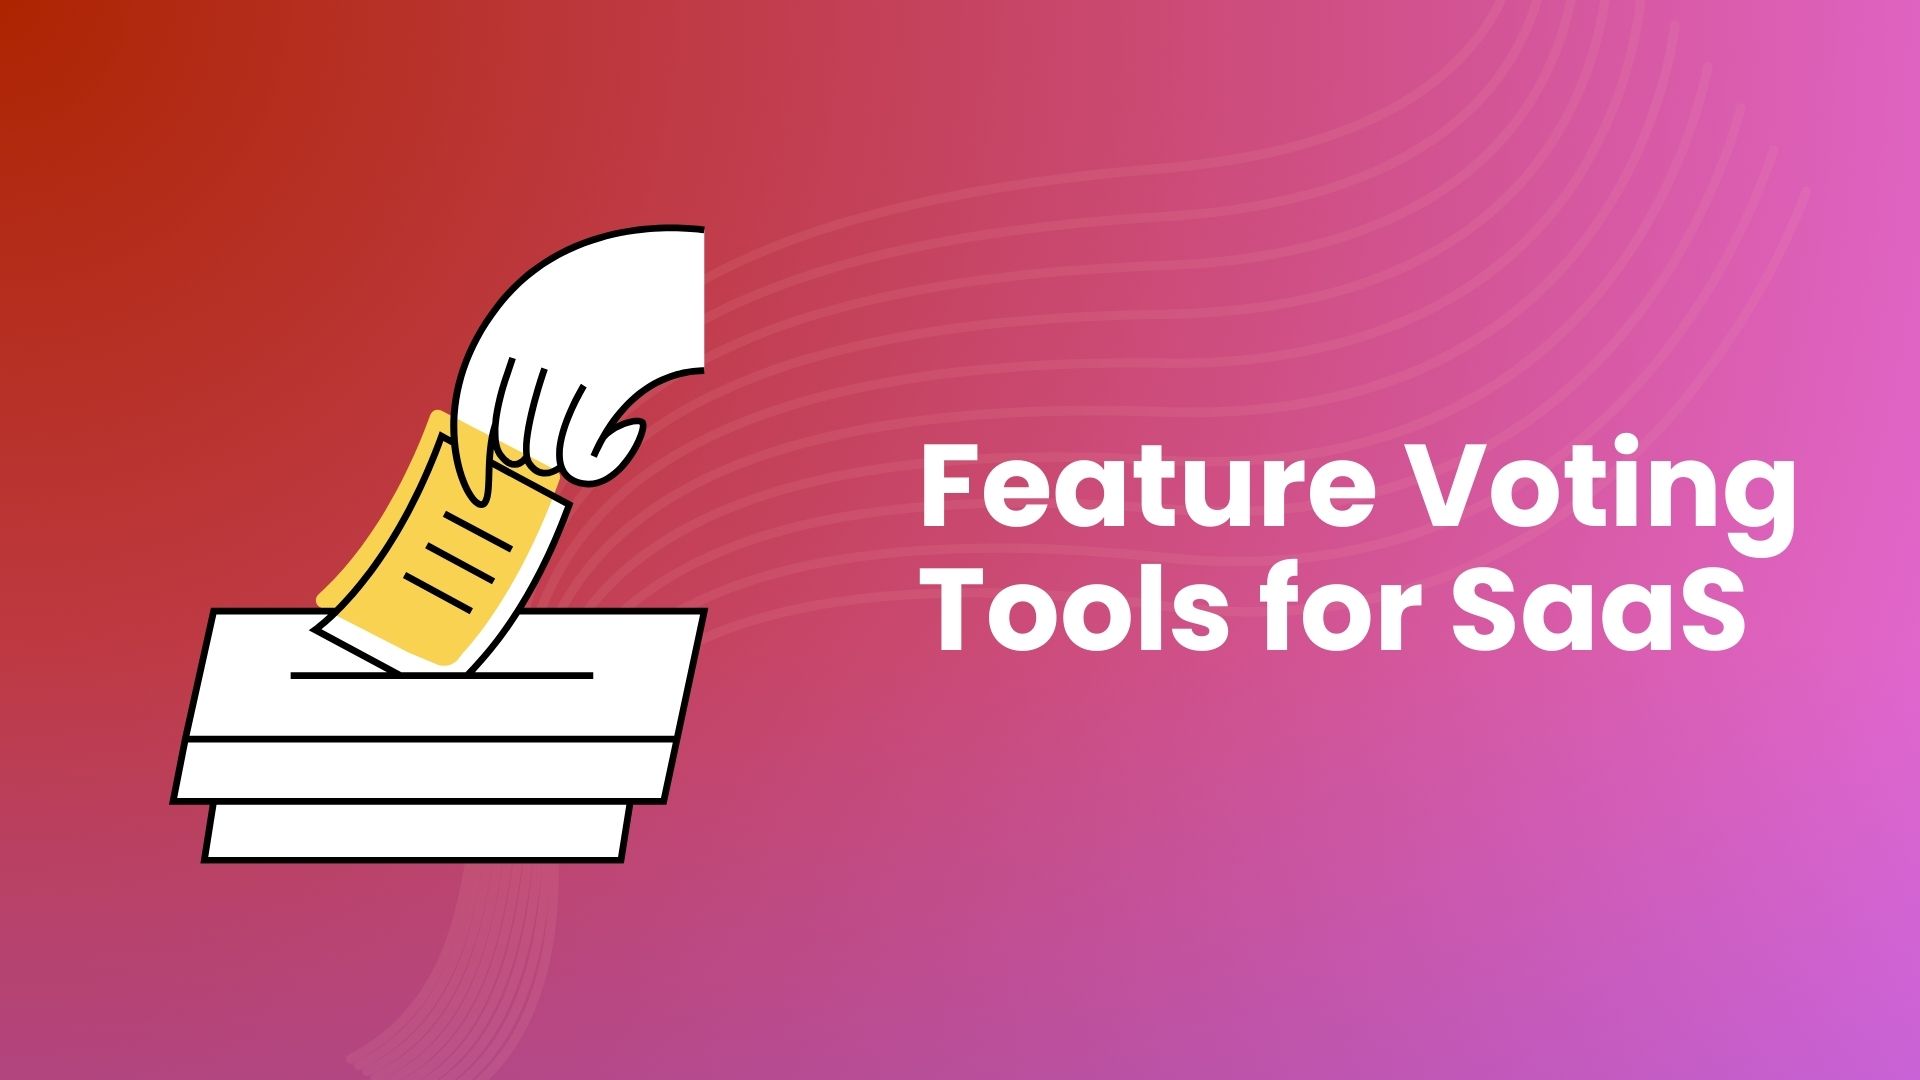 Feature voting tools for saas